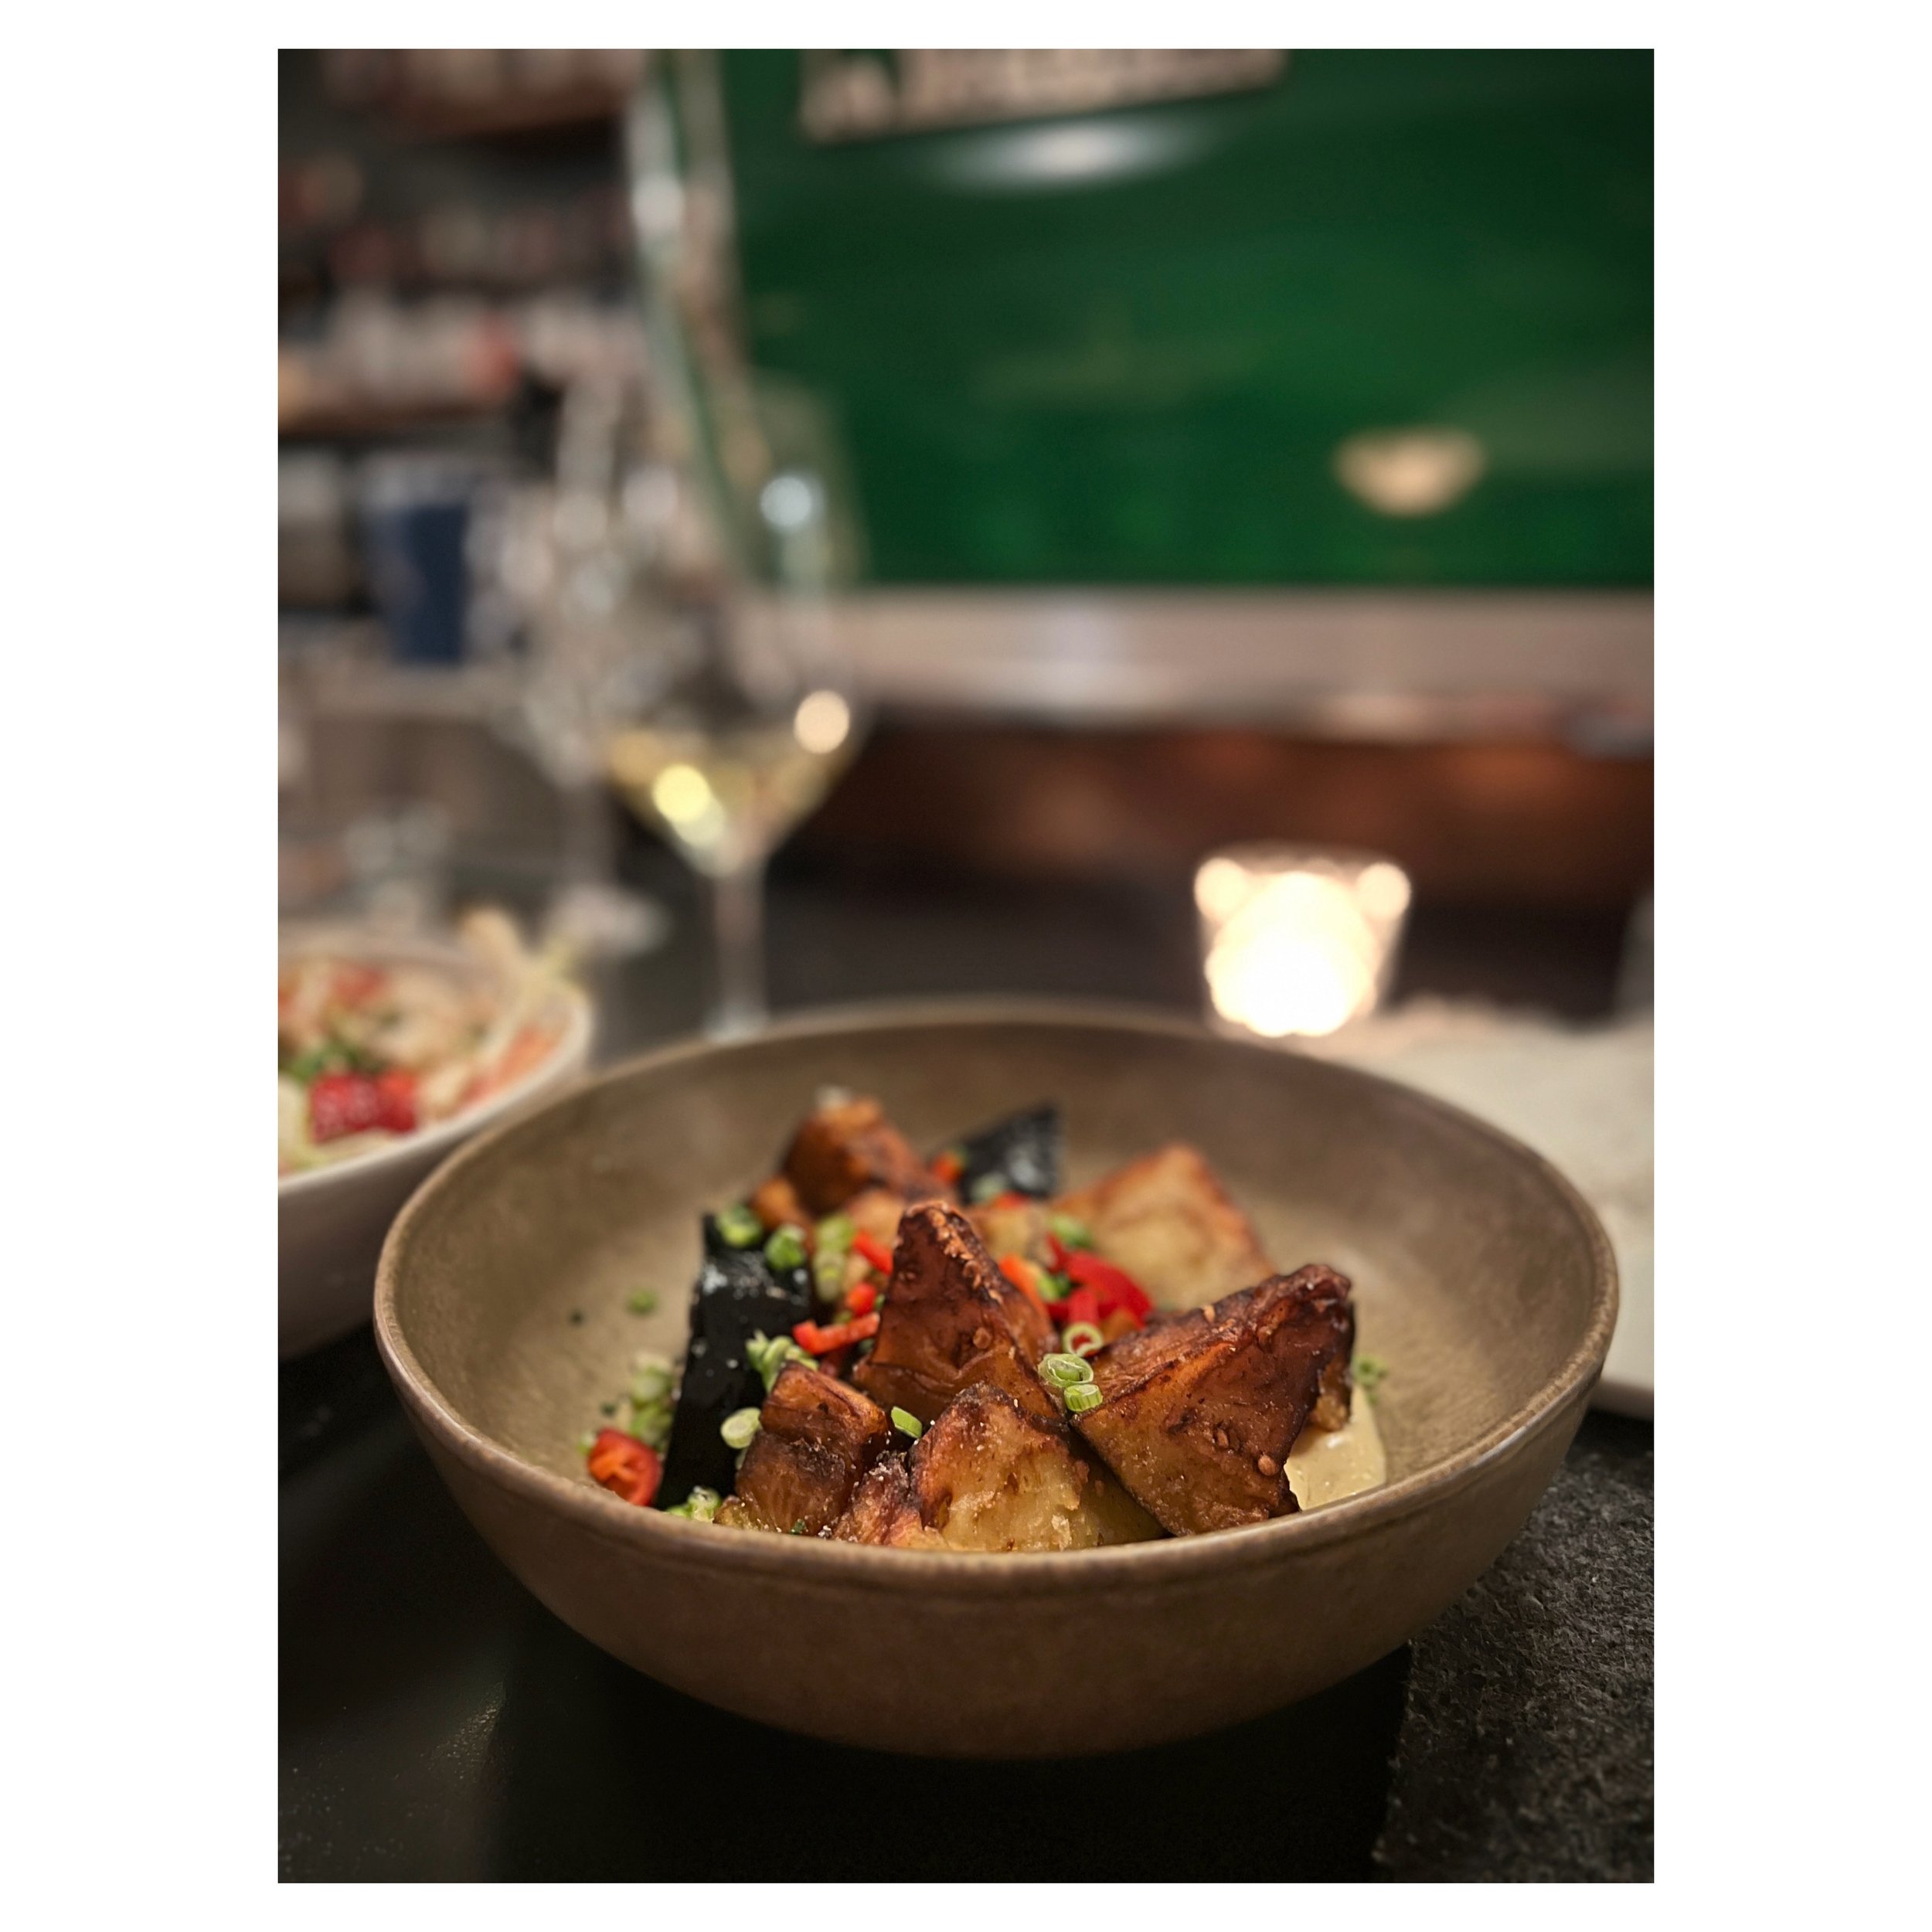 We&rsquo;re always playing around with our veggies at Kabinett&mdash;let us introduce you to the newest member of the family, our crispy fried eggplant. That description doesn&rsquo;t quite tell the whole story, though. While there&rsquo;s a light, c